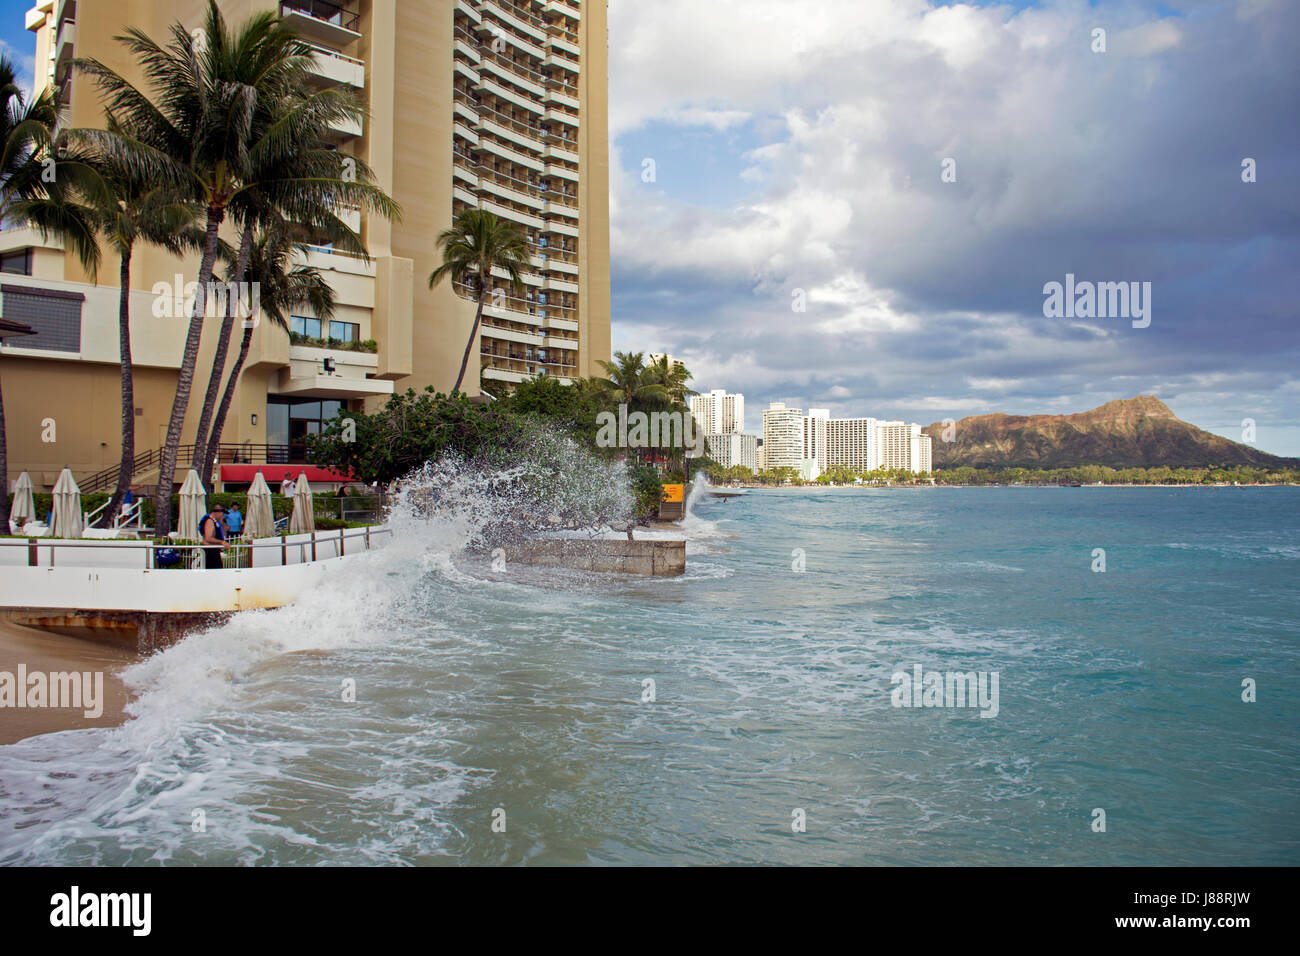 Record high tides or king tides in Waikiki Beach in May 2017, Oahu